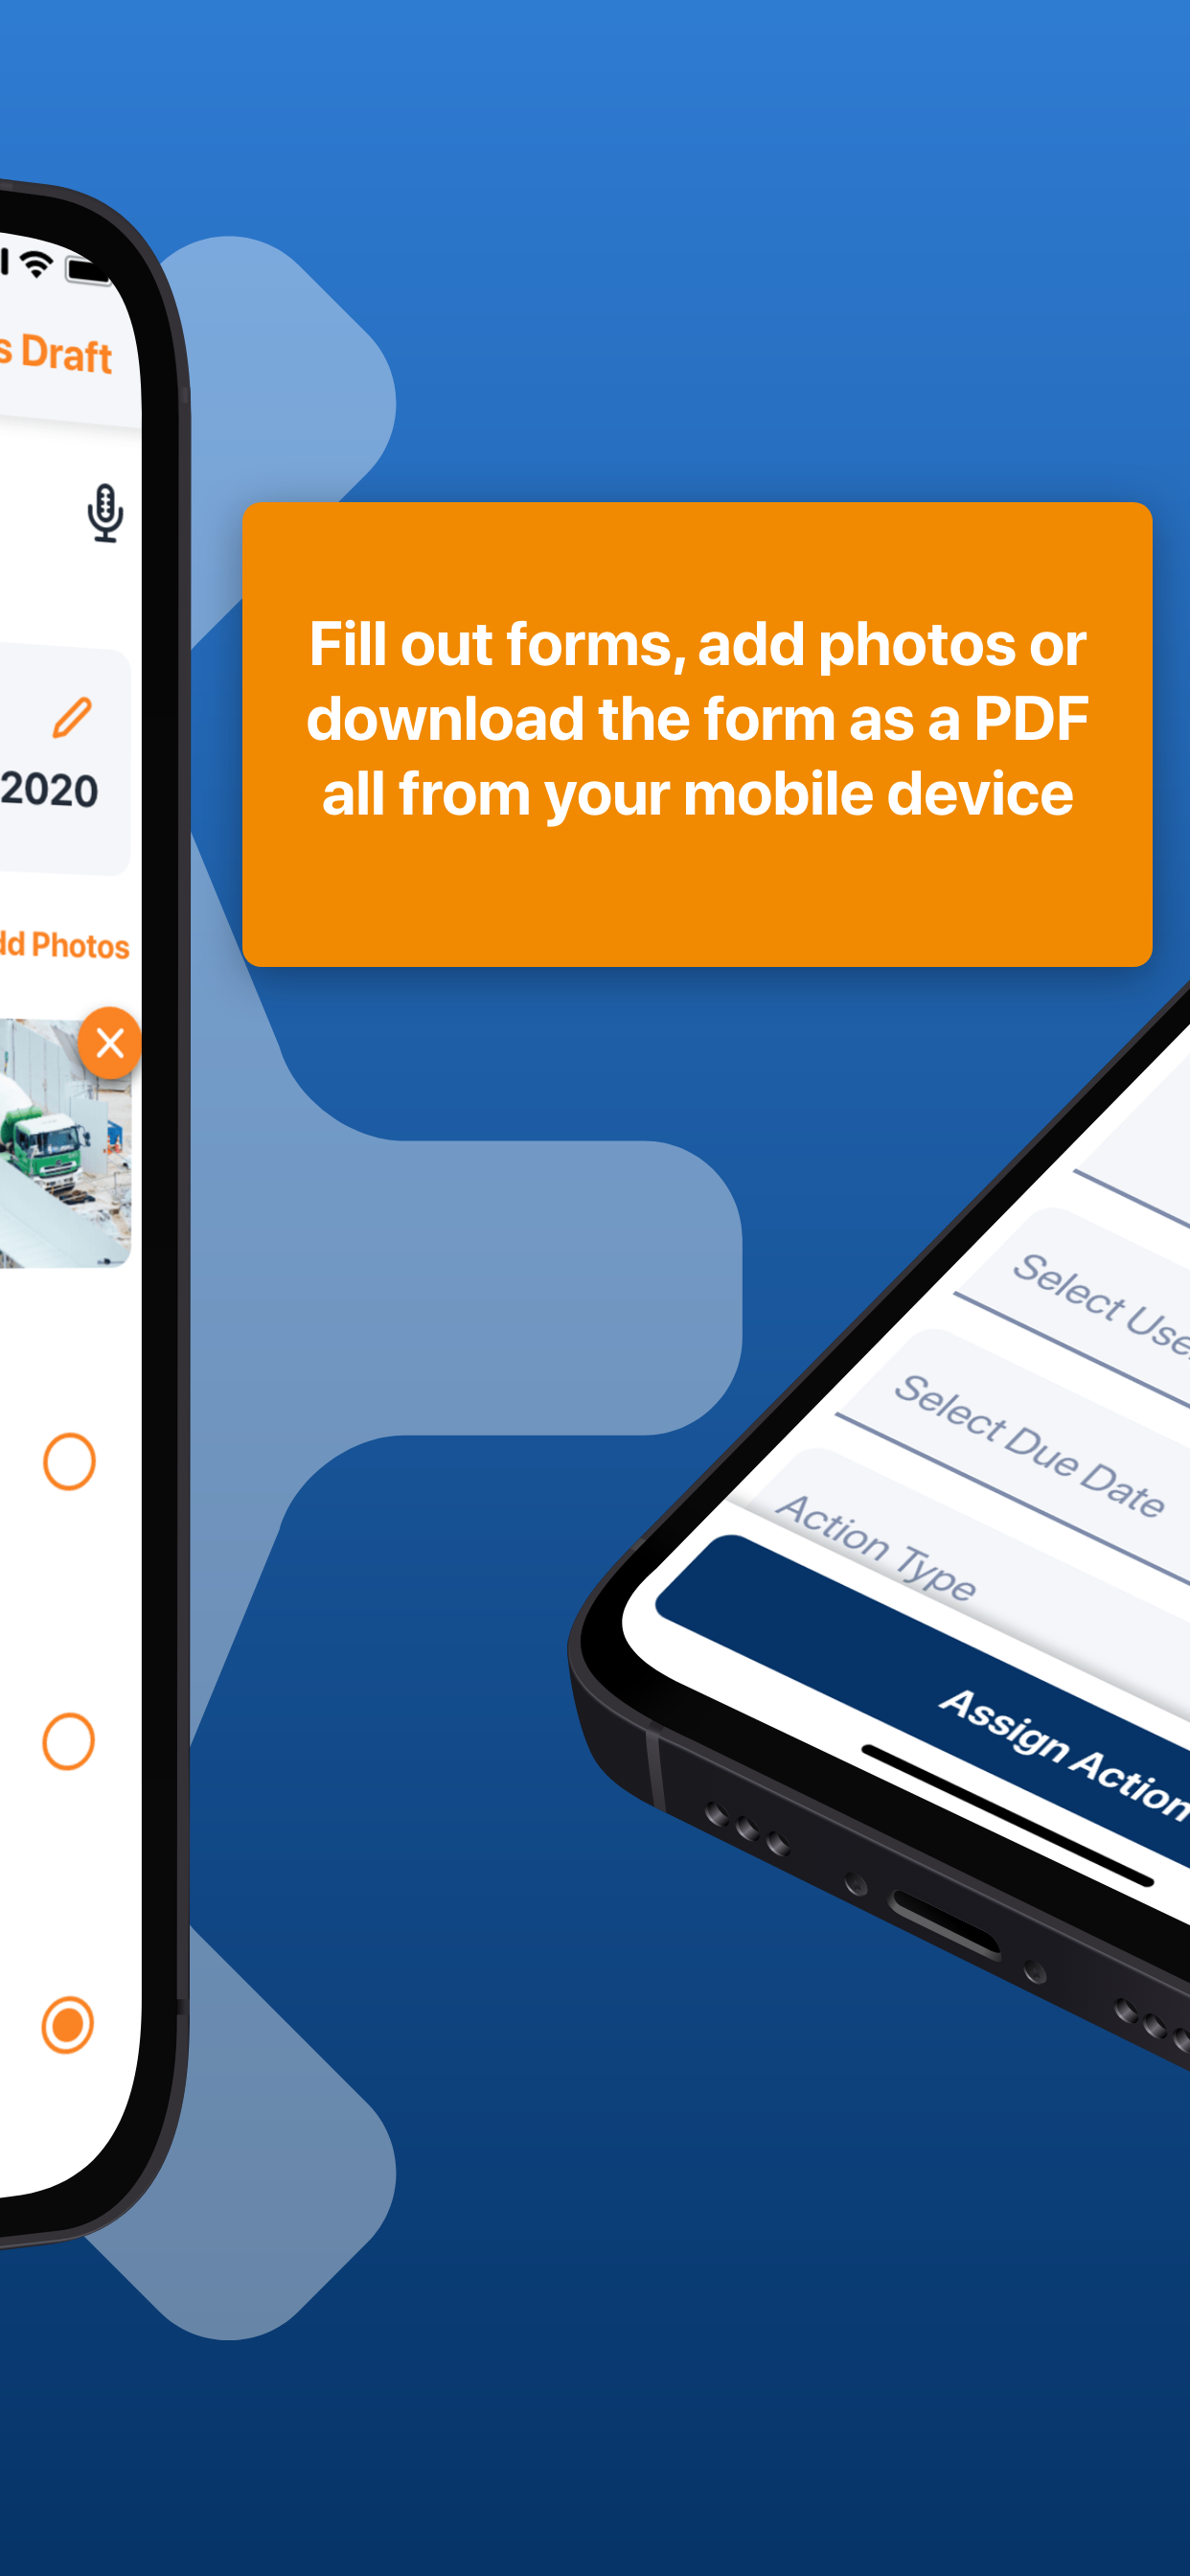 WorkforceDocs Software - Fill out forms, add photos or download the form as a PDF all from your mobile device.